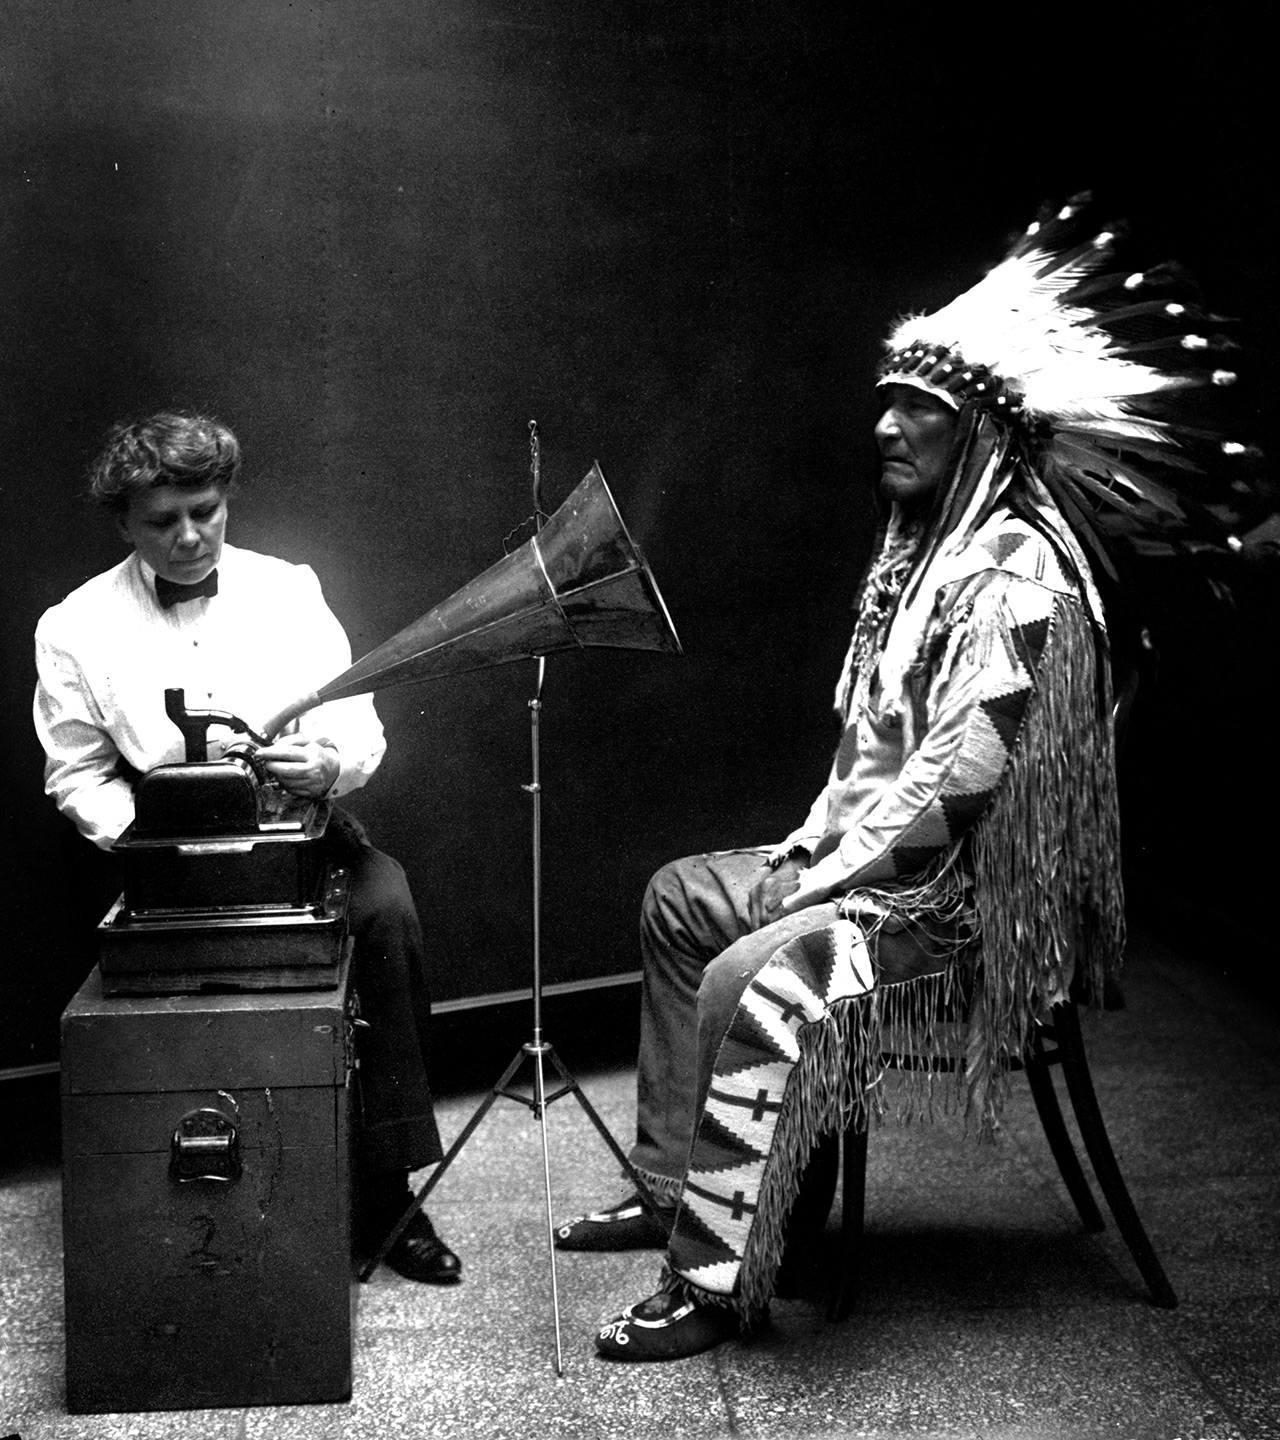 [Piegan Indian, Mountain Chief, listening to recording with ethnologist Frances Densmore]